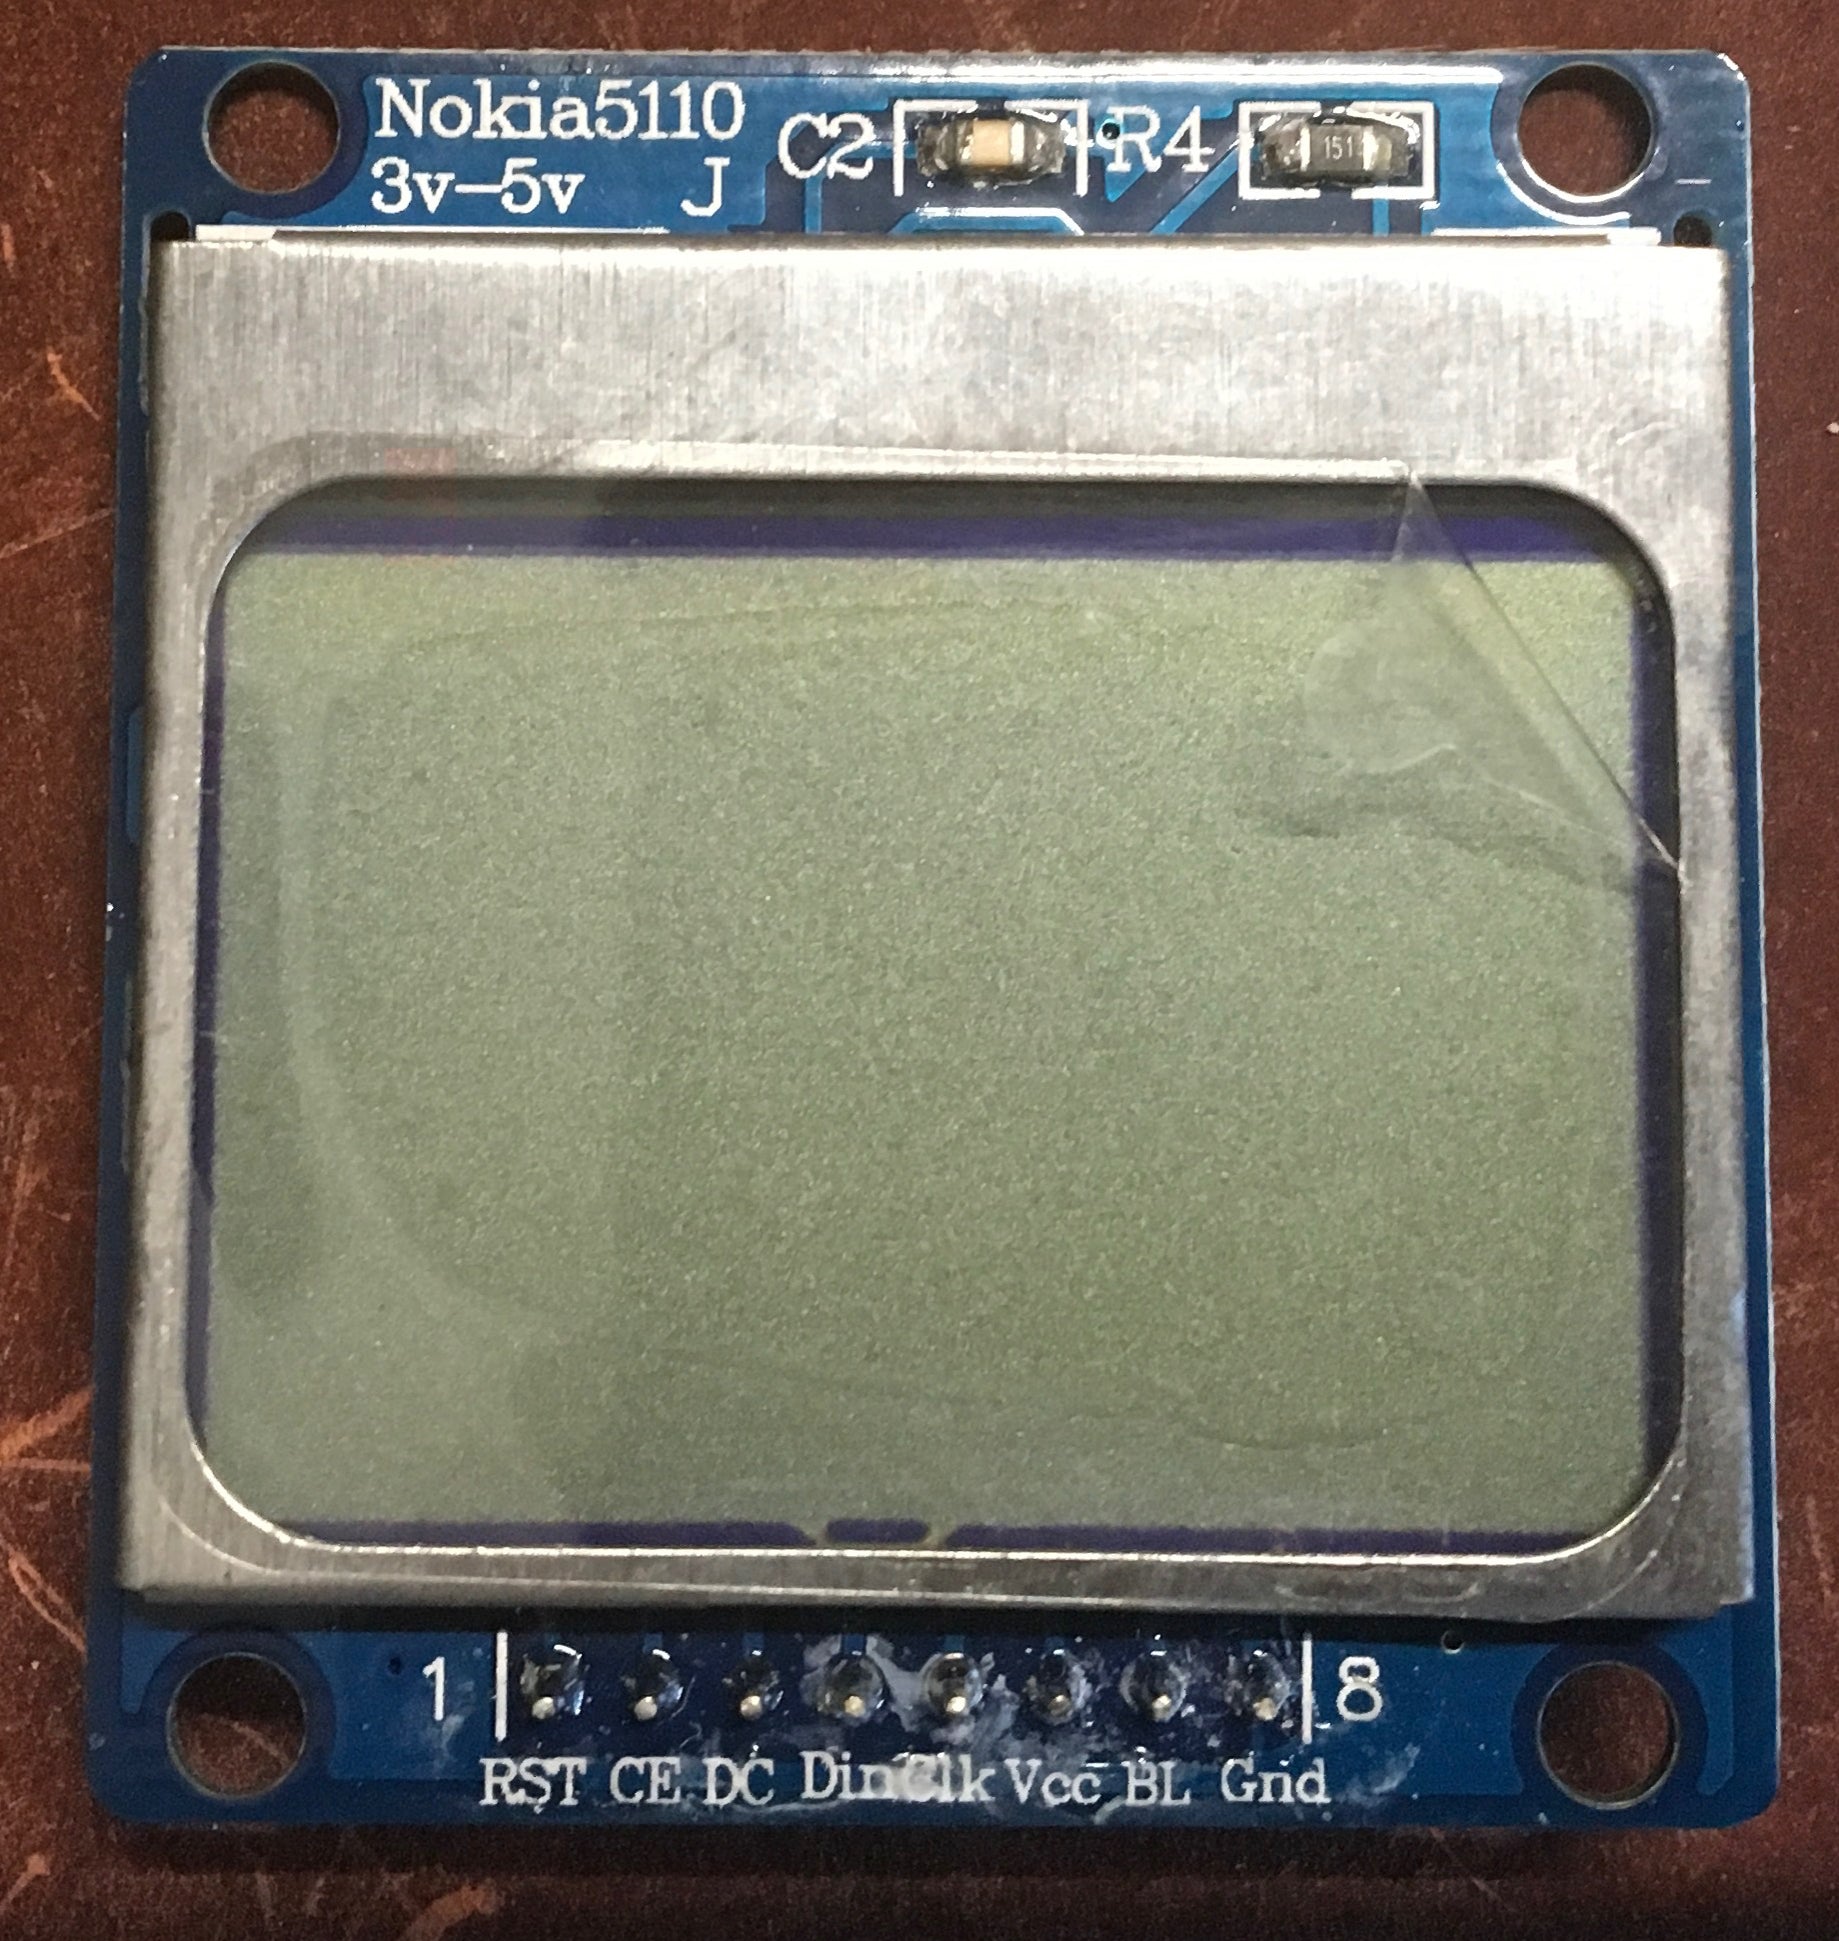 Nokia 5110 LCD 84x48 w PCD8544 3.3v/5v w soldered Headers for Arduino, Raspberry, nodeMCU - Server On The Move